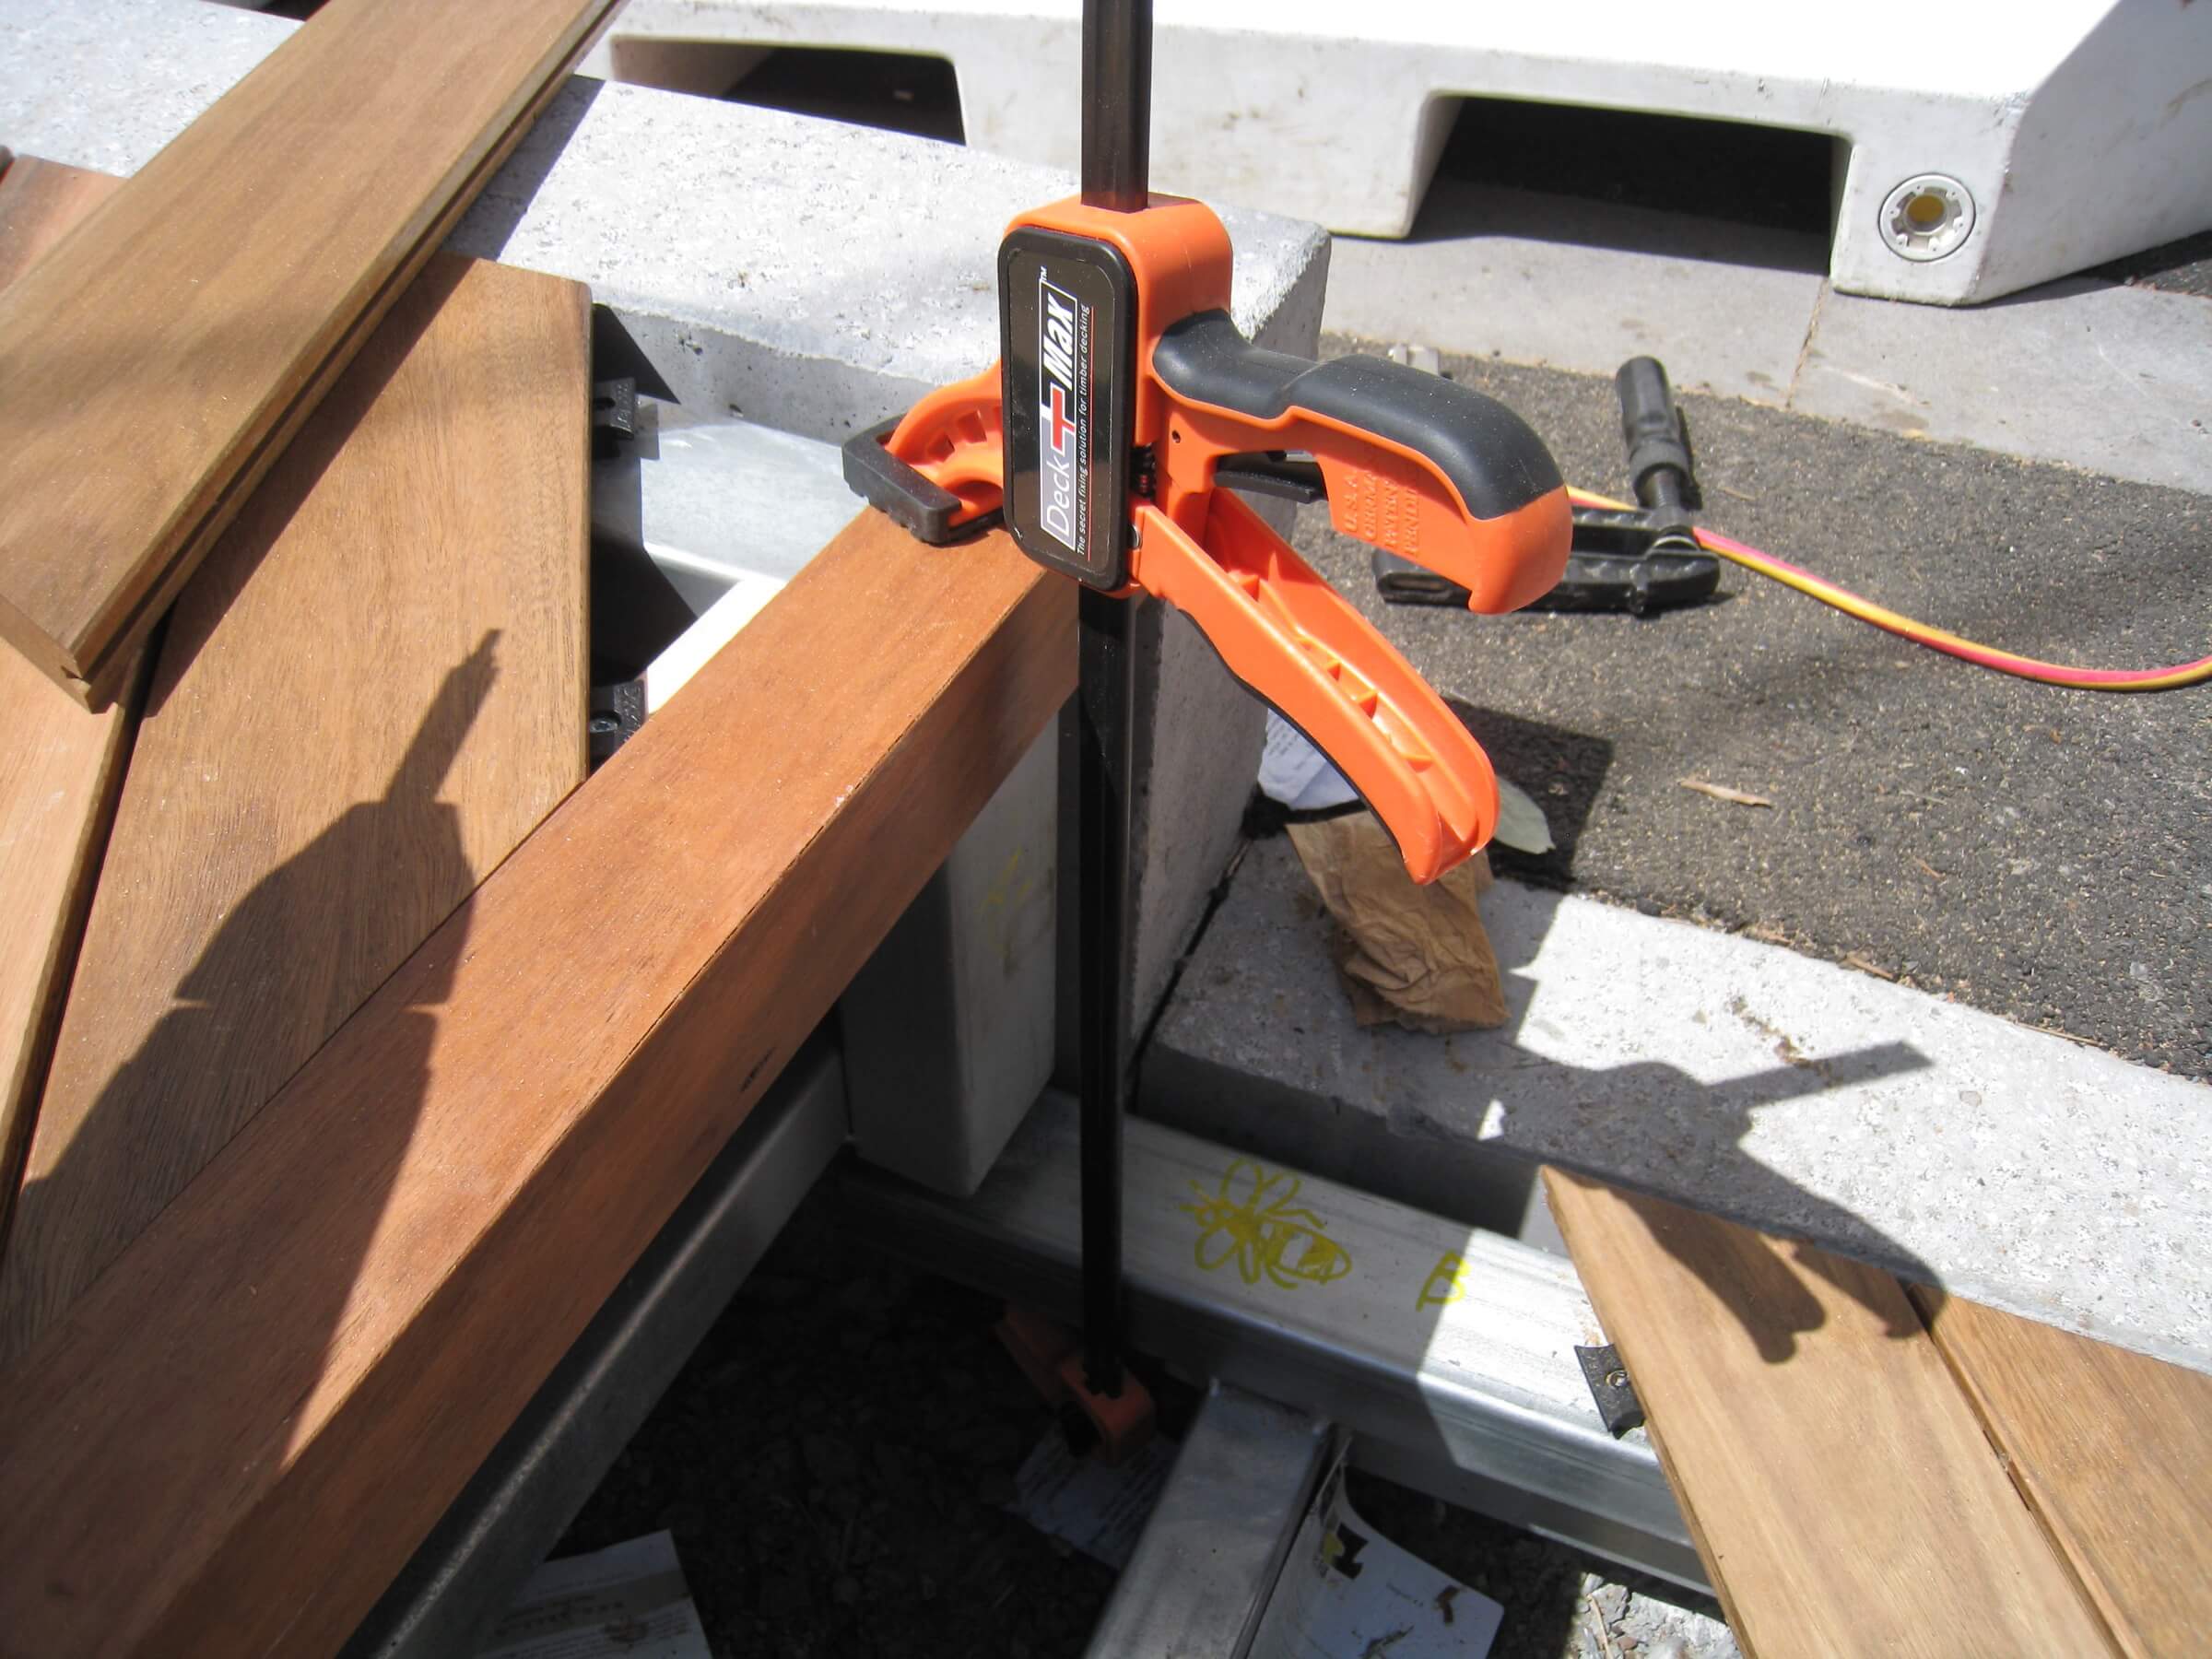 Decking clamps and other Deck-Max kits